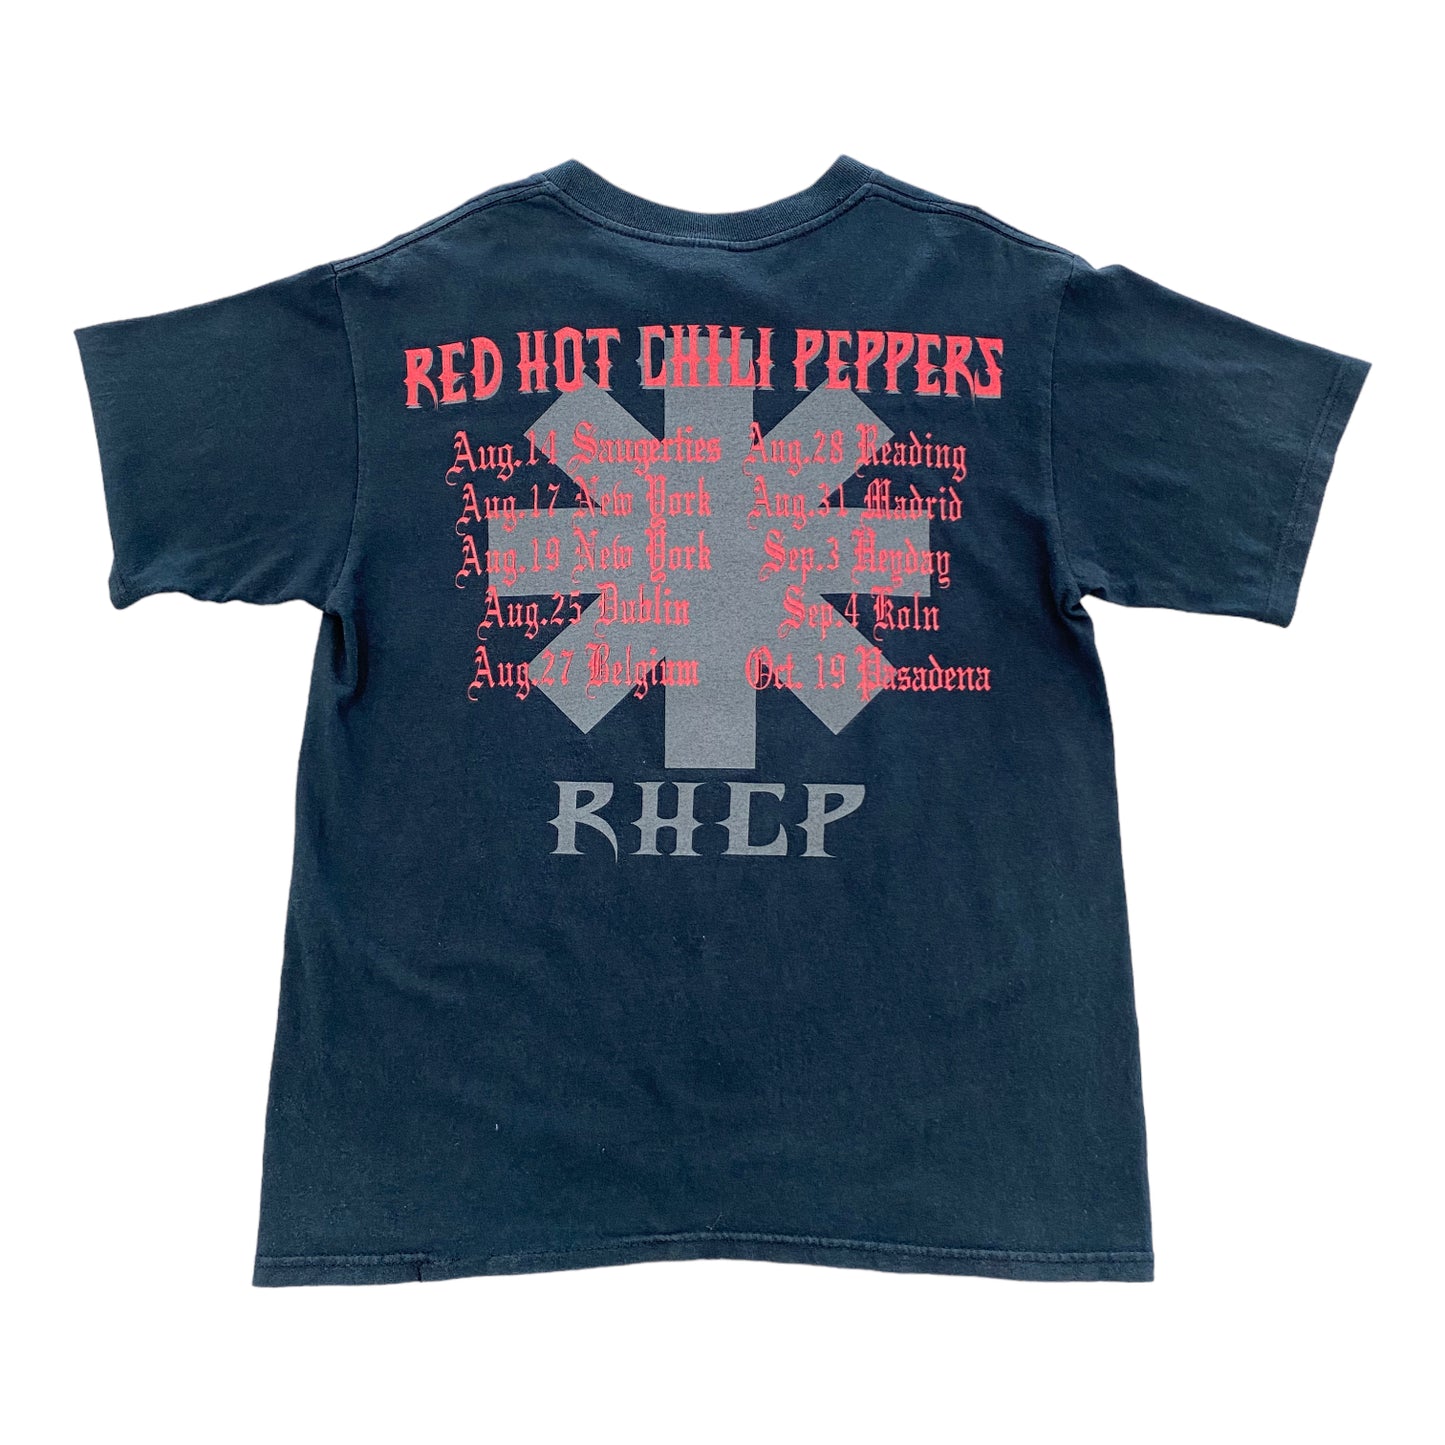 1992 Red Hot Chili Peppers Vintage Band T-shirt